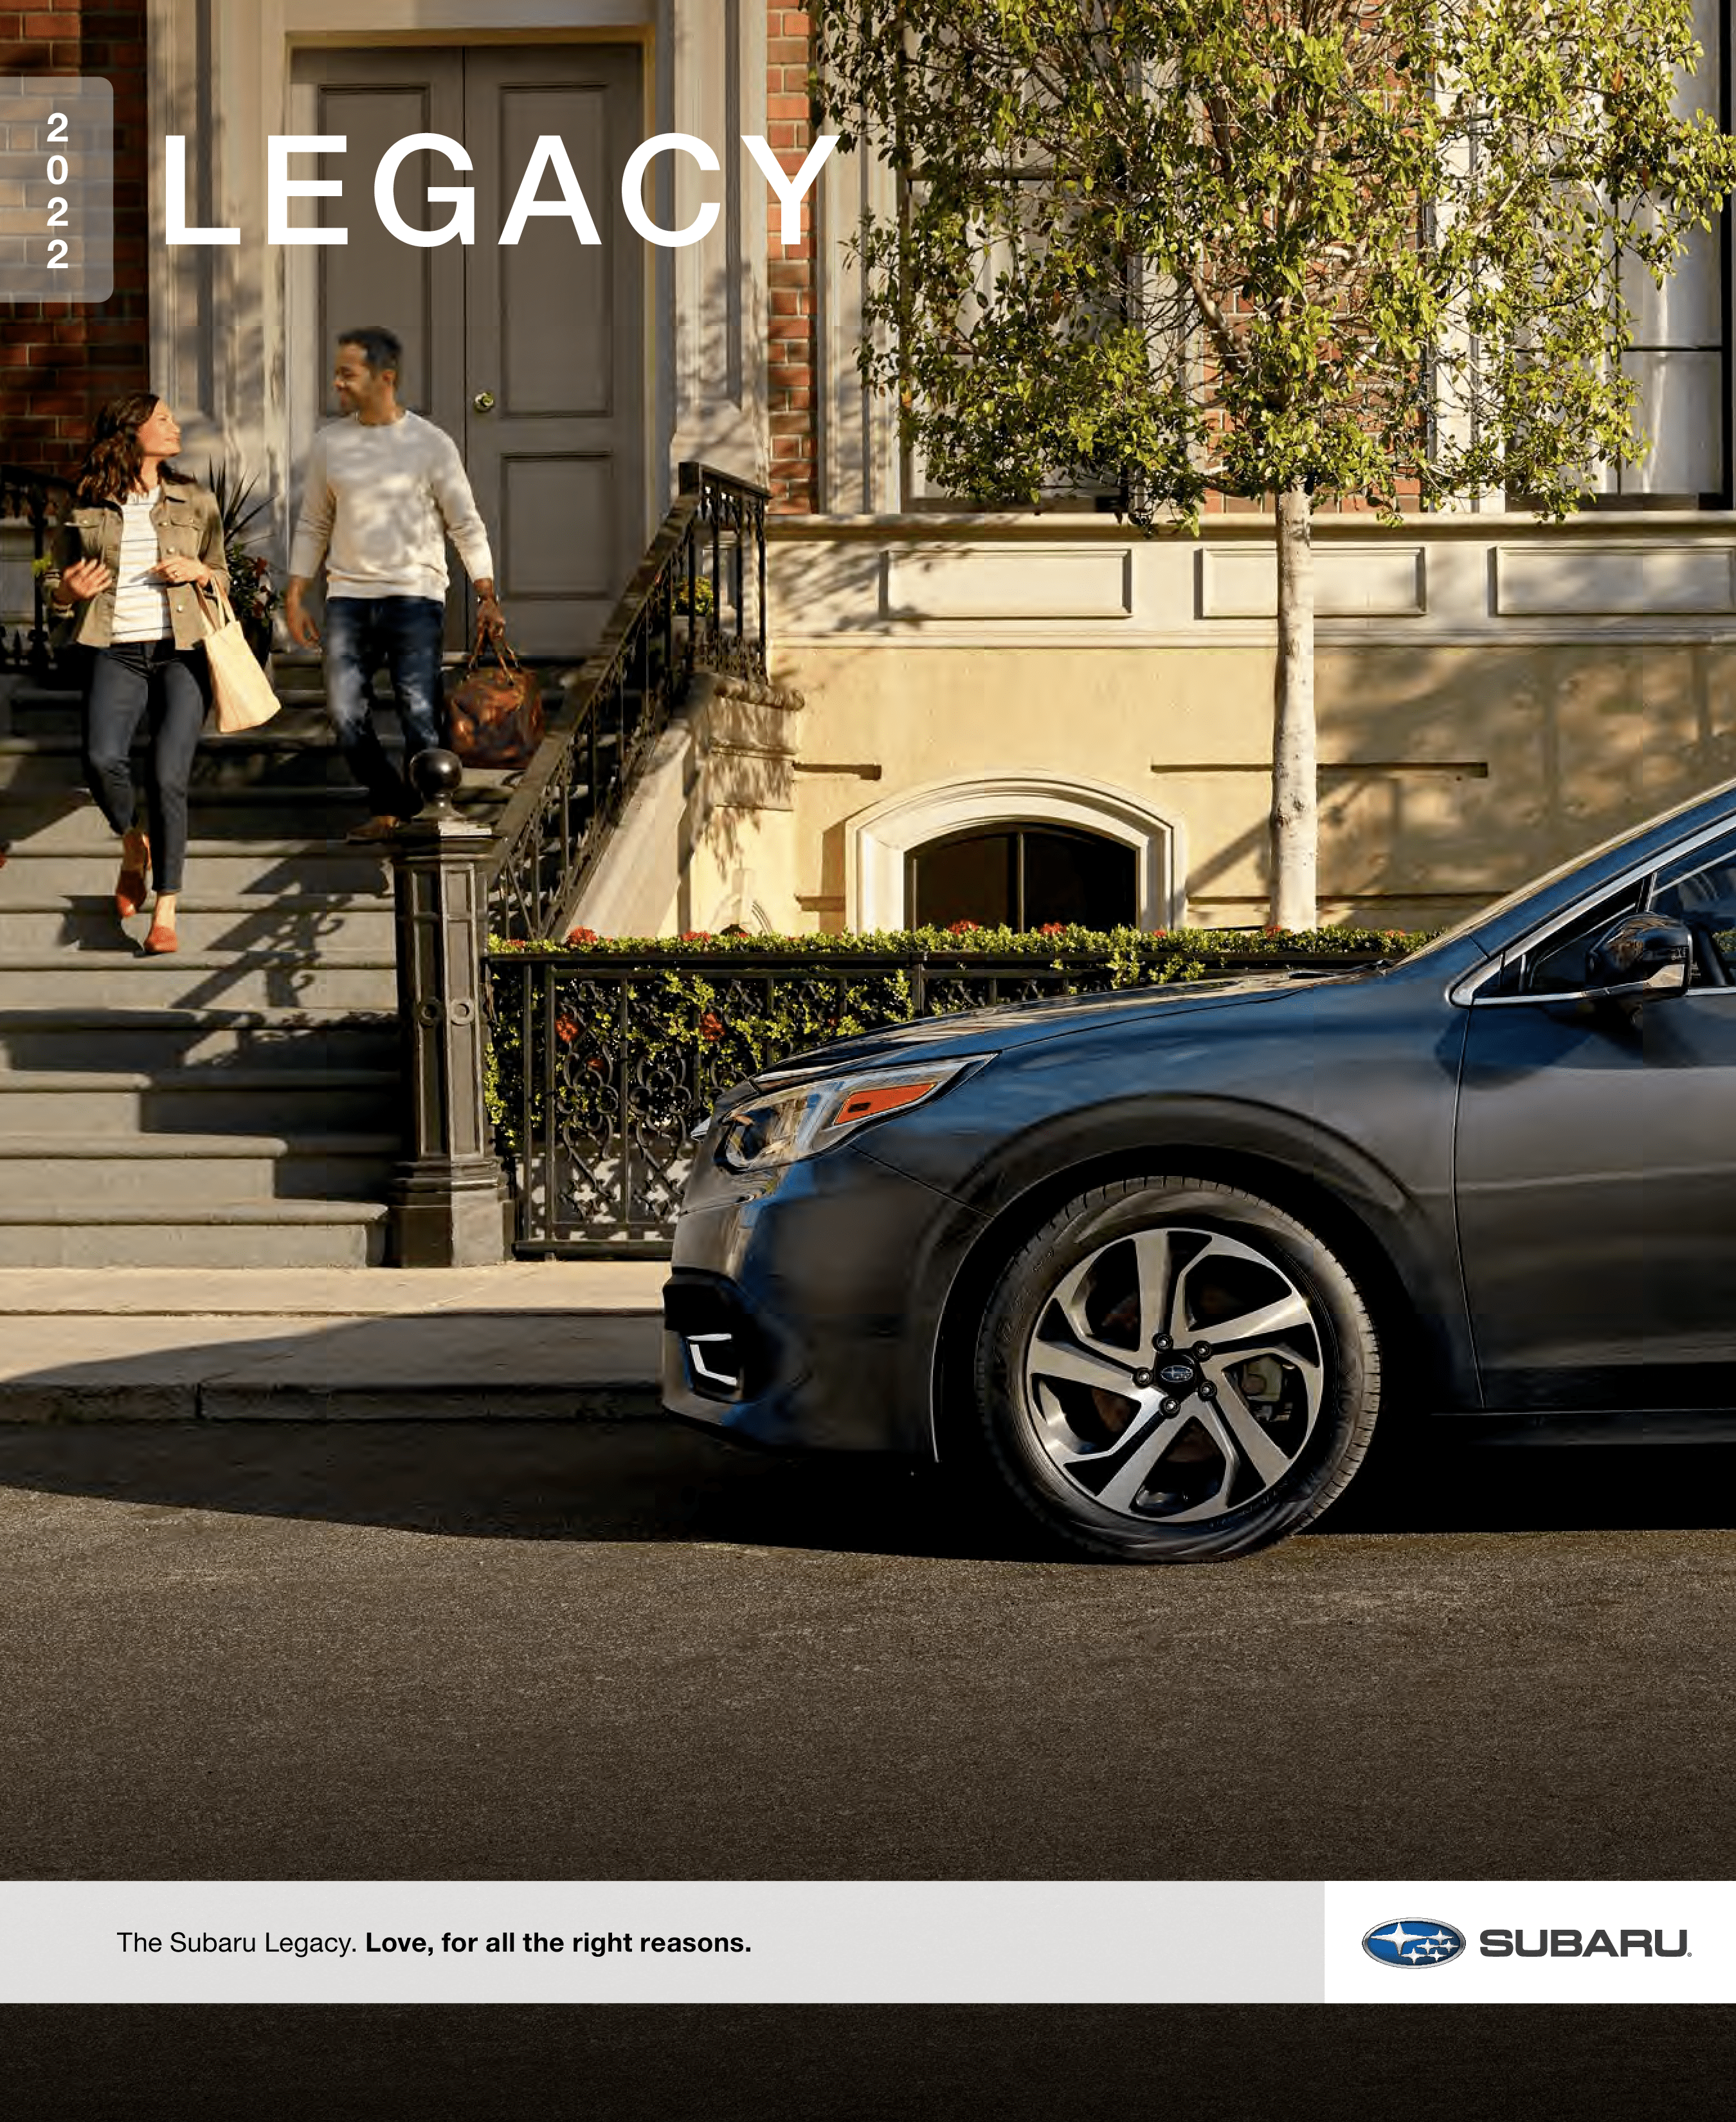 2022 Legacy image with link to brochure.